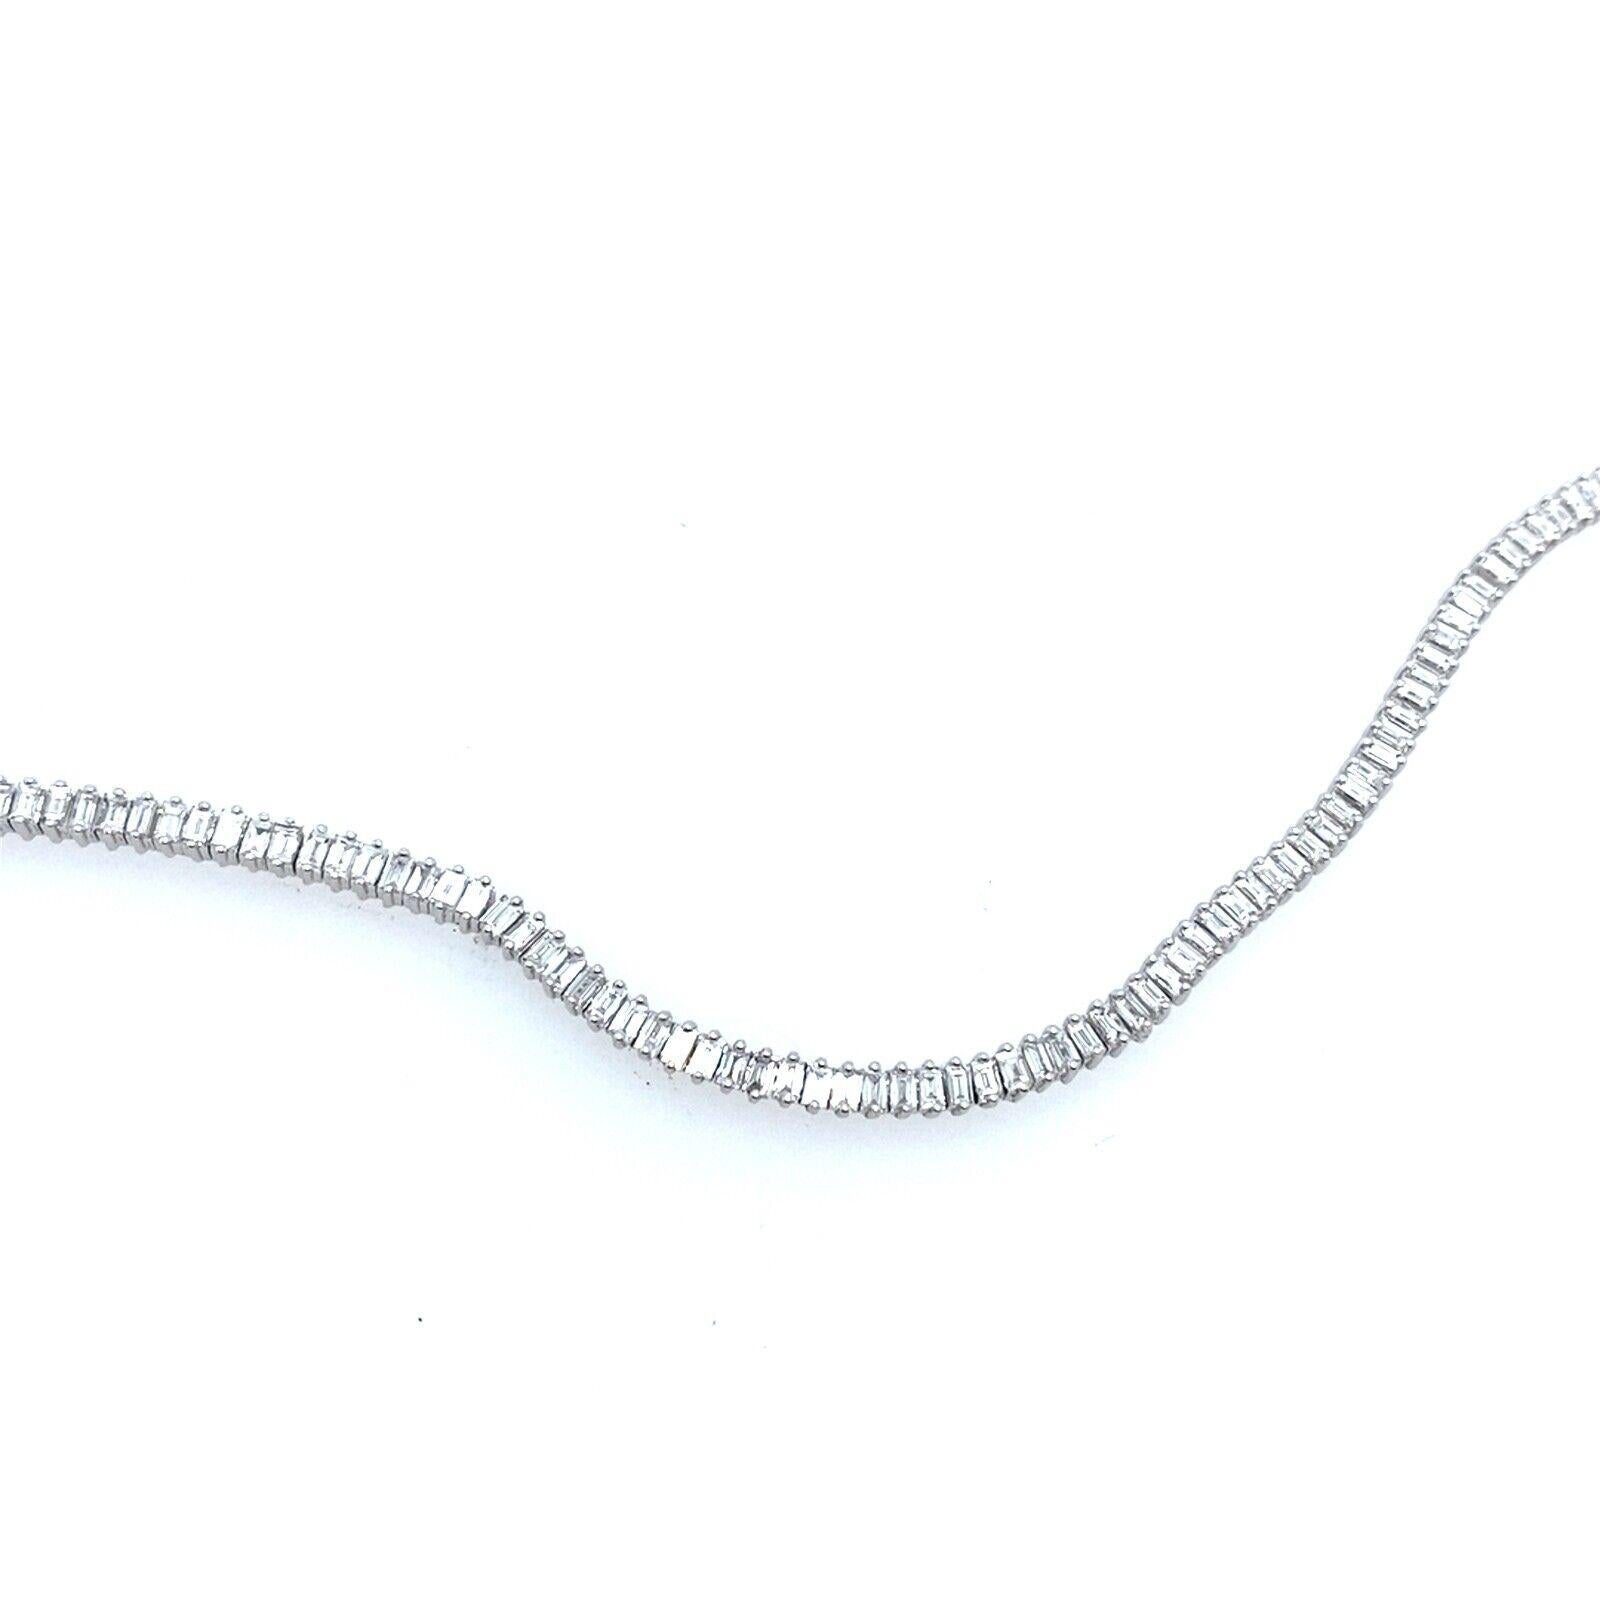 Baguette Cut Diamond Tennis Necklace Set with 4.40ct of Baguette Diamonds in 18ct White Gold For Sale